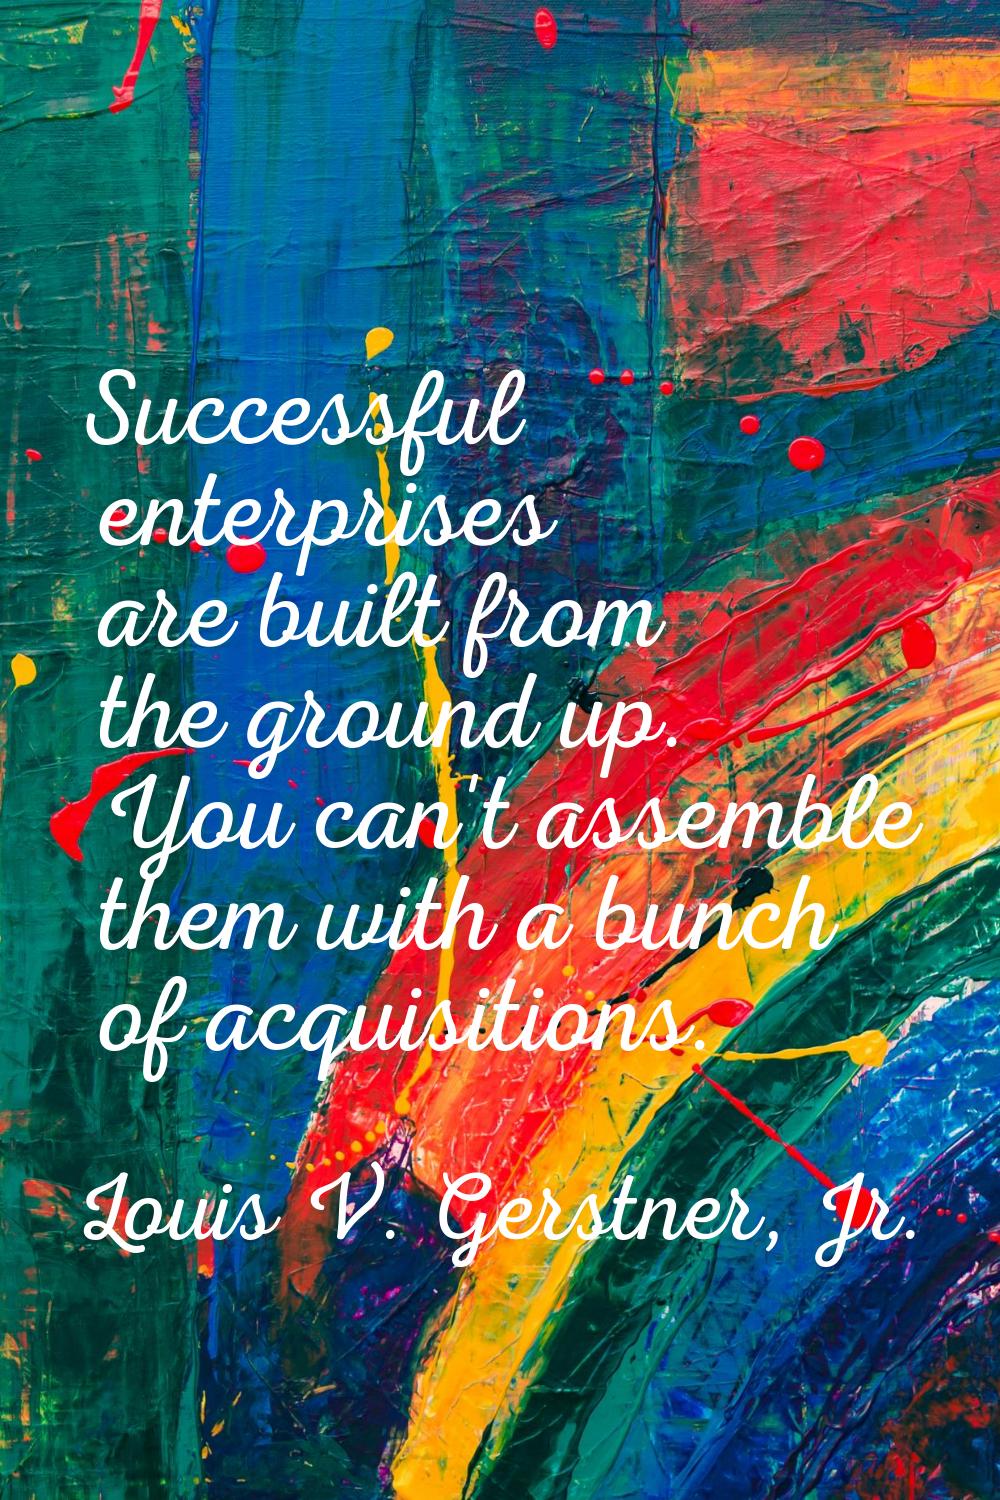 Successful enterprises are built from the ground up. You can't assemble them with a bunch of acquis